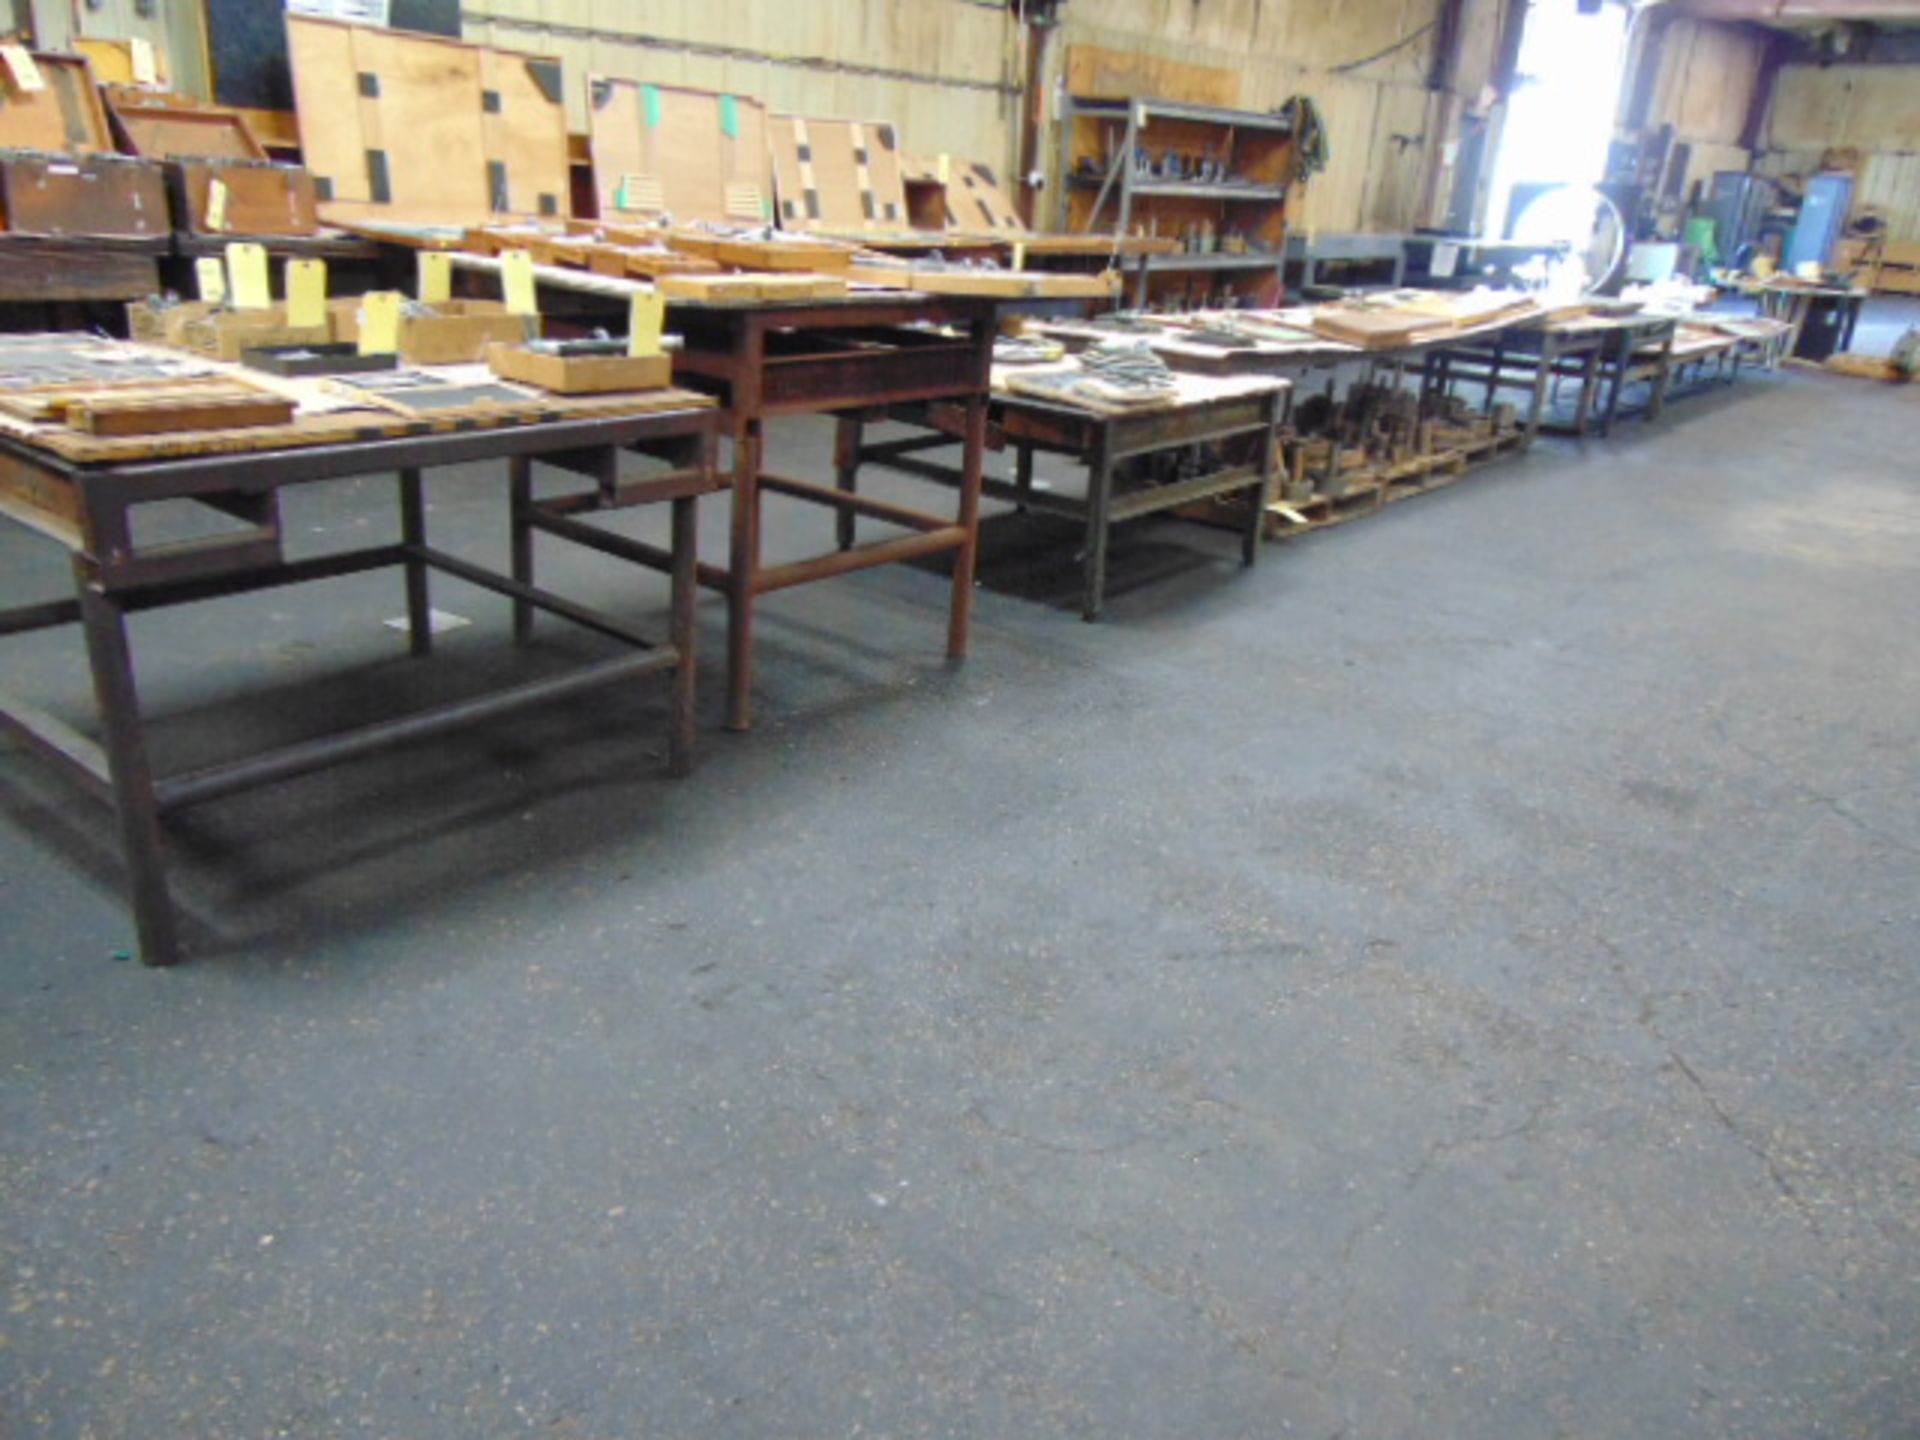 LOT CONSISTING OF: (5) steel stands, (4) benches & (2) tables